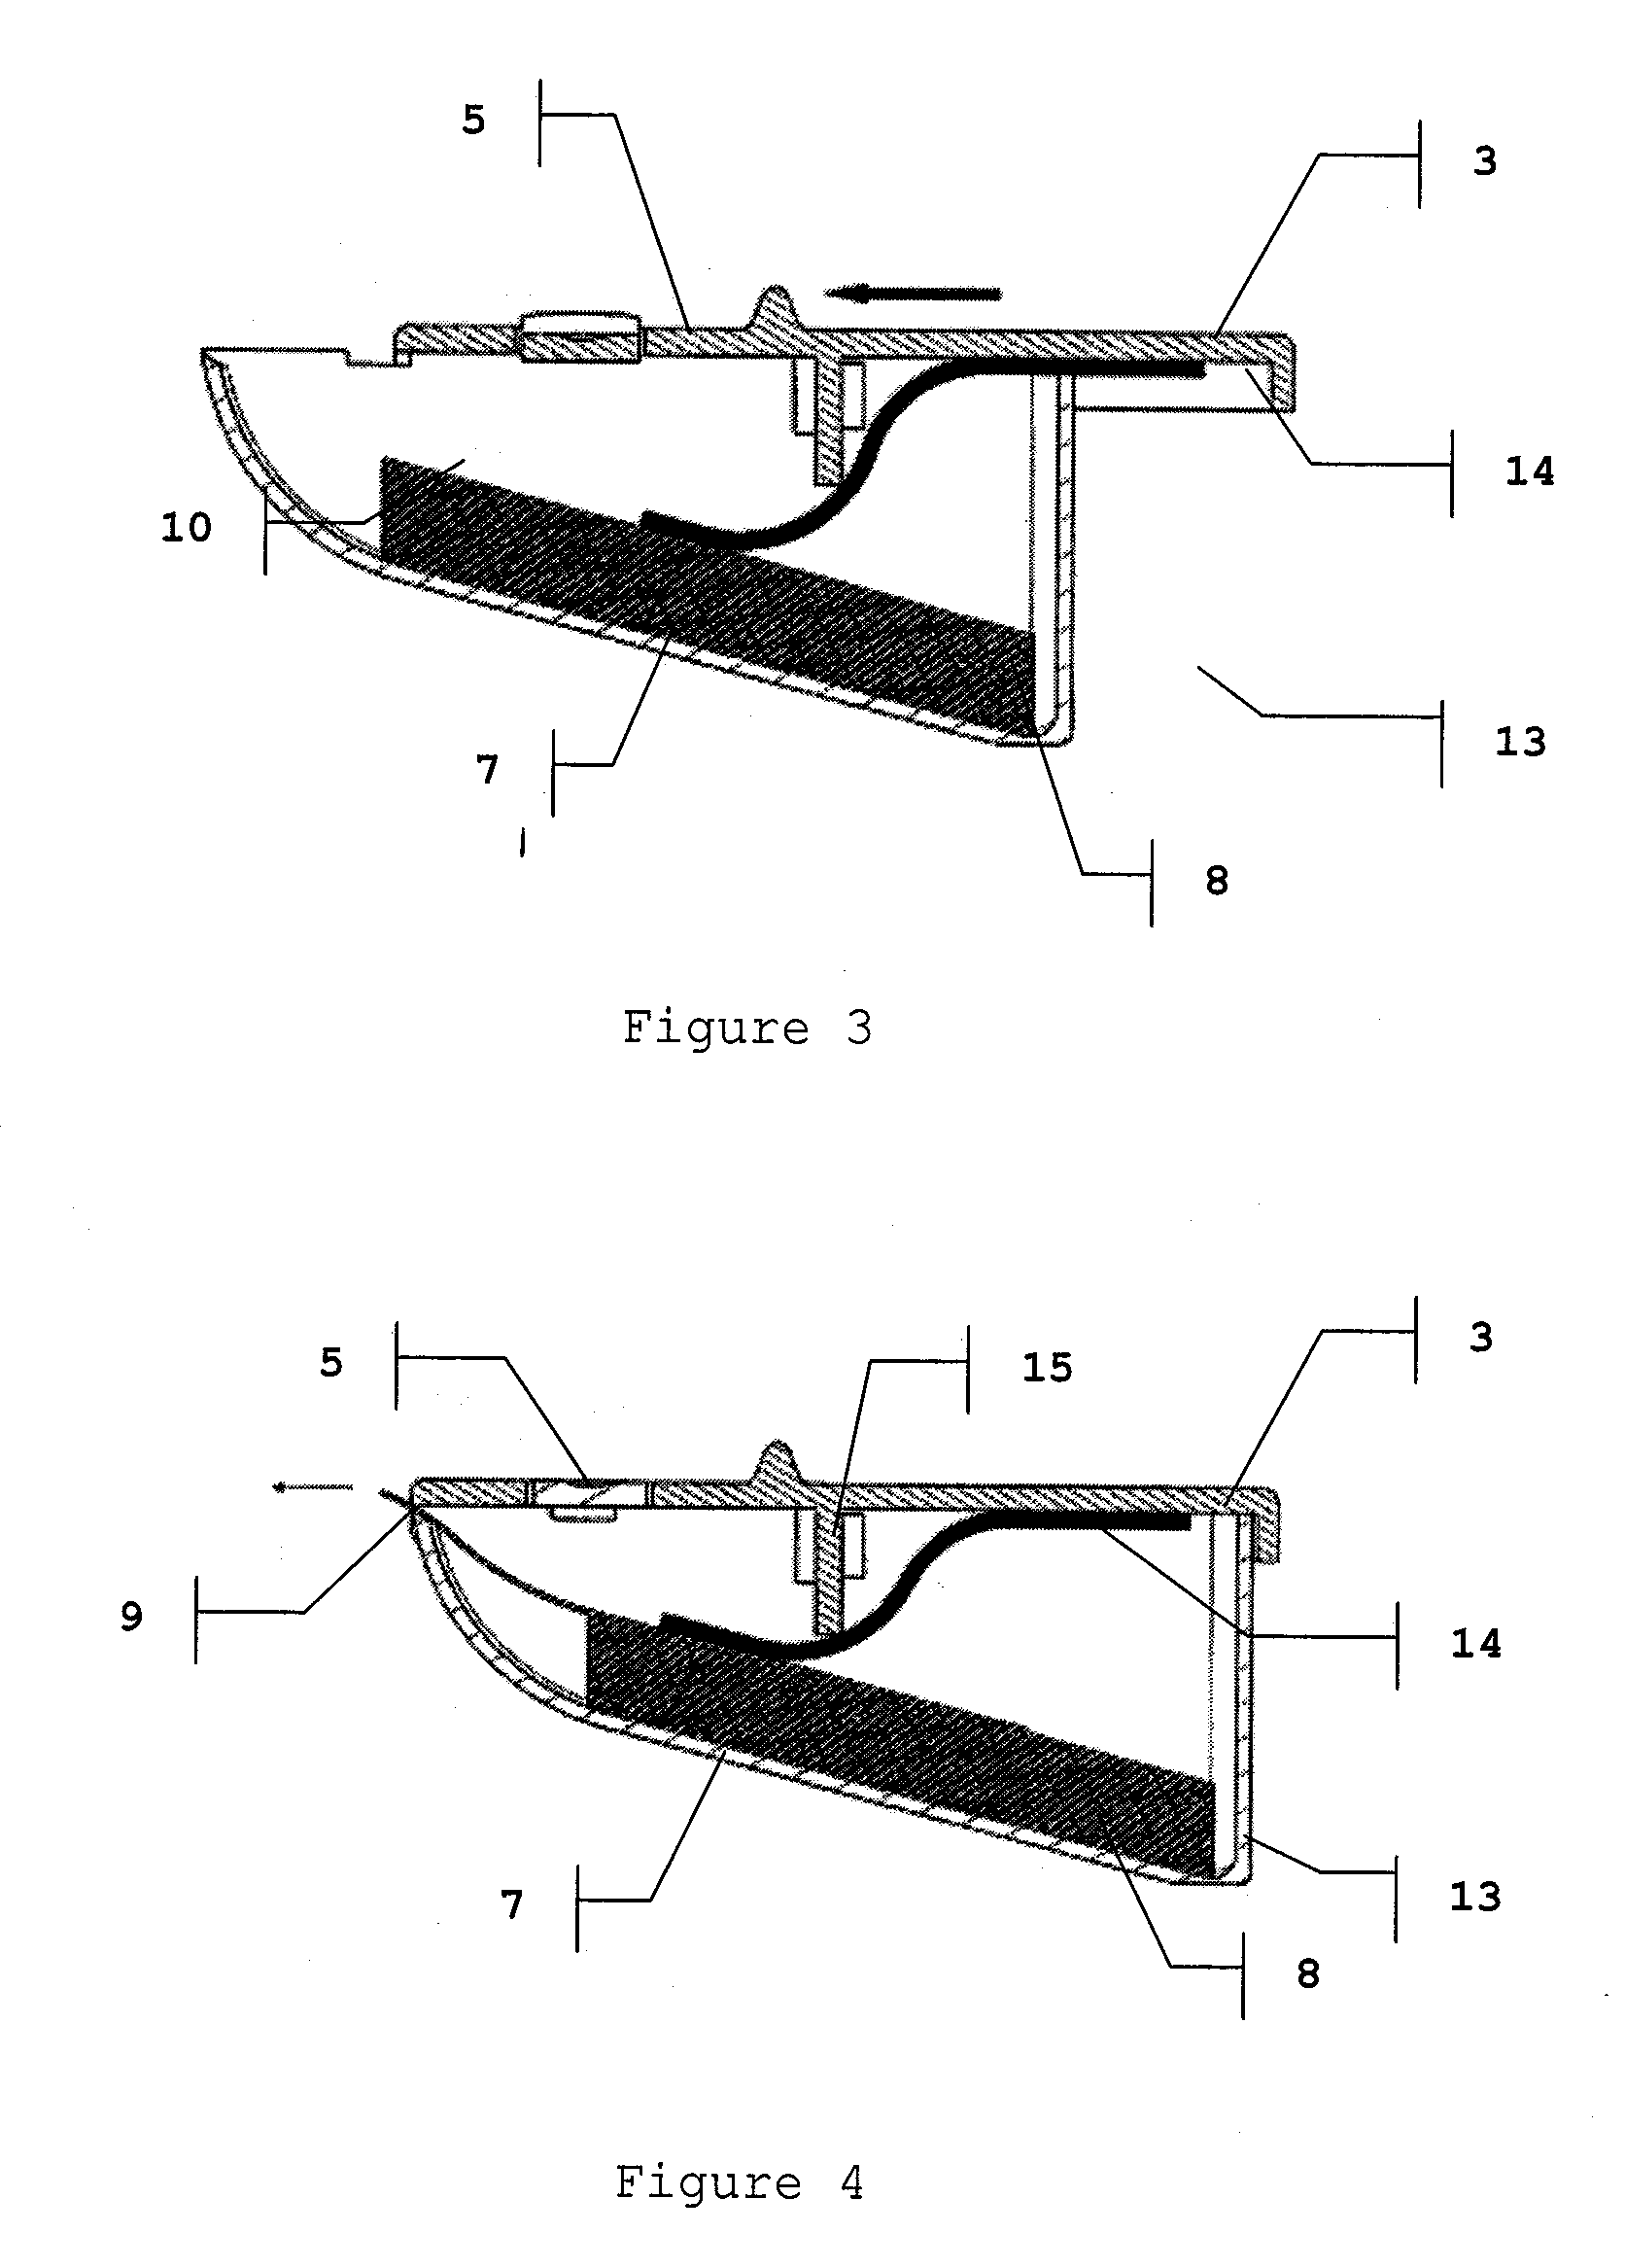 Device for storing and dispensing in single units objects in the form of sheets or thin strips